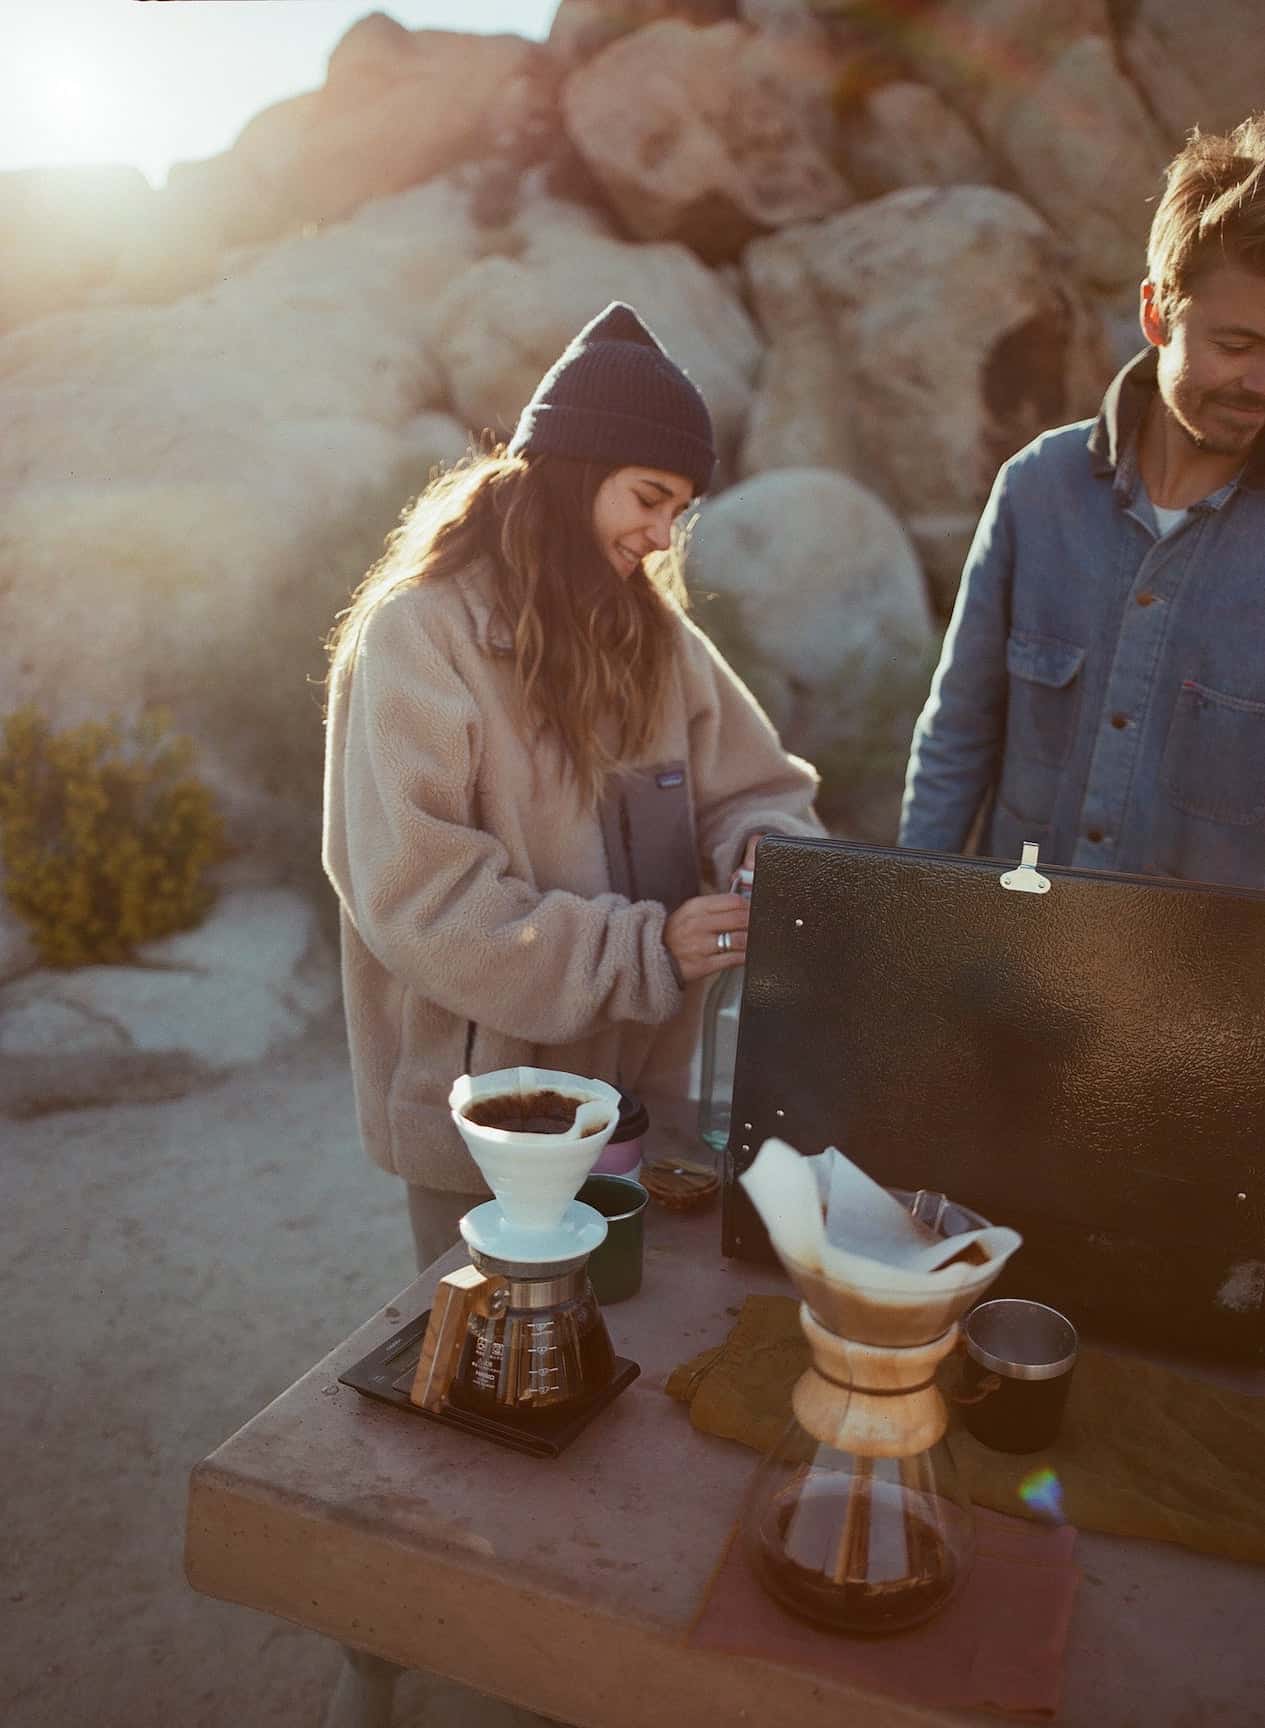 Two people making coffee at a campsite.